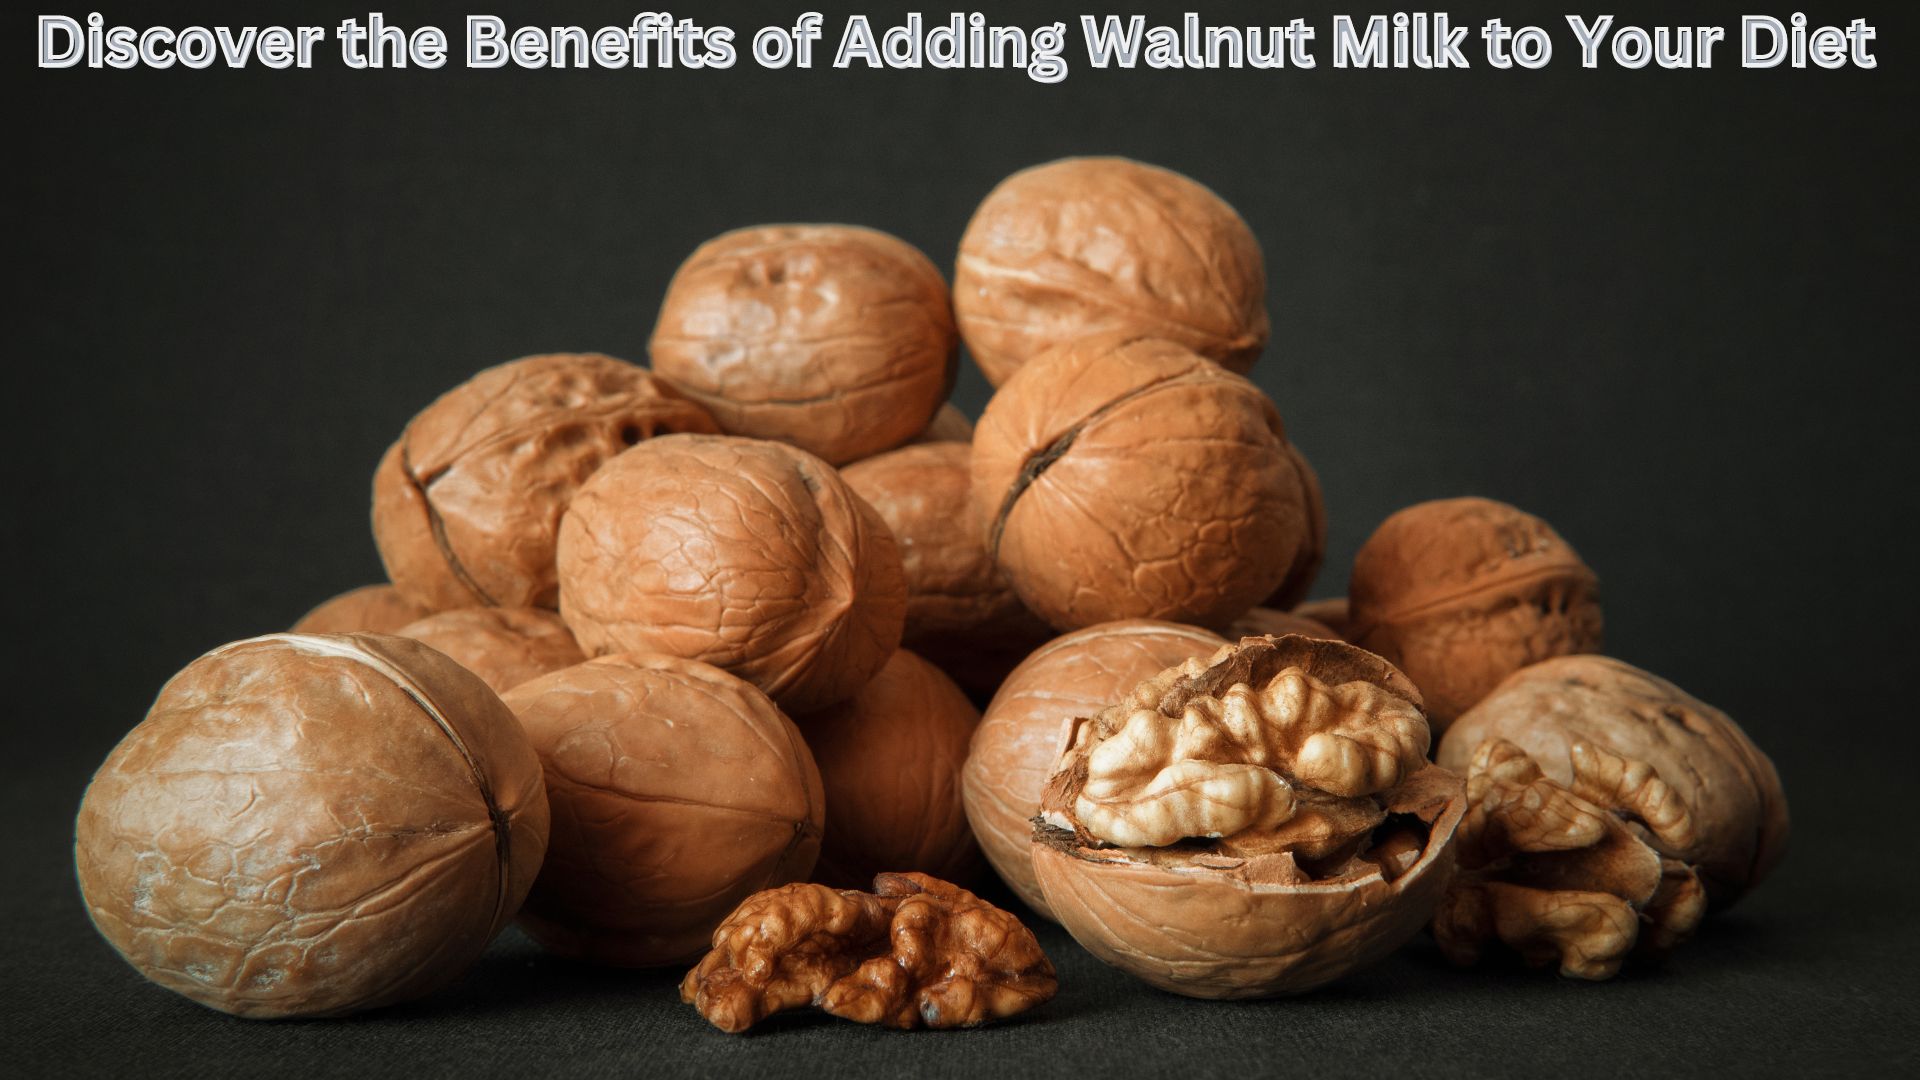 Discover the Benefits of Adding Walnut Milk to Your Diet